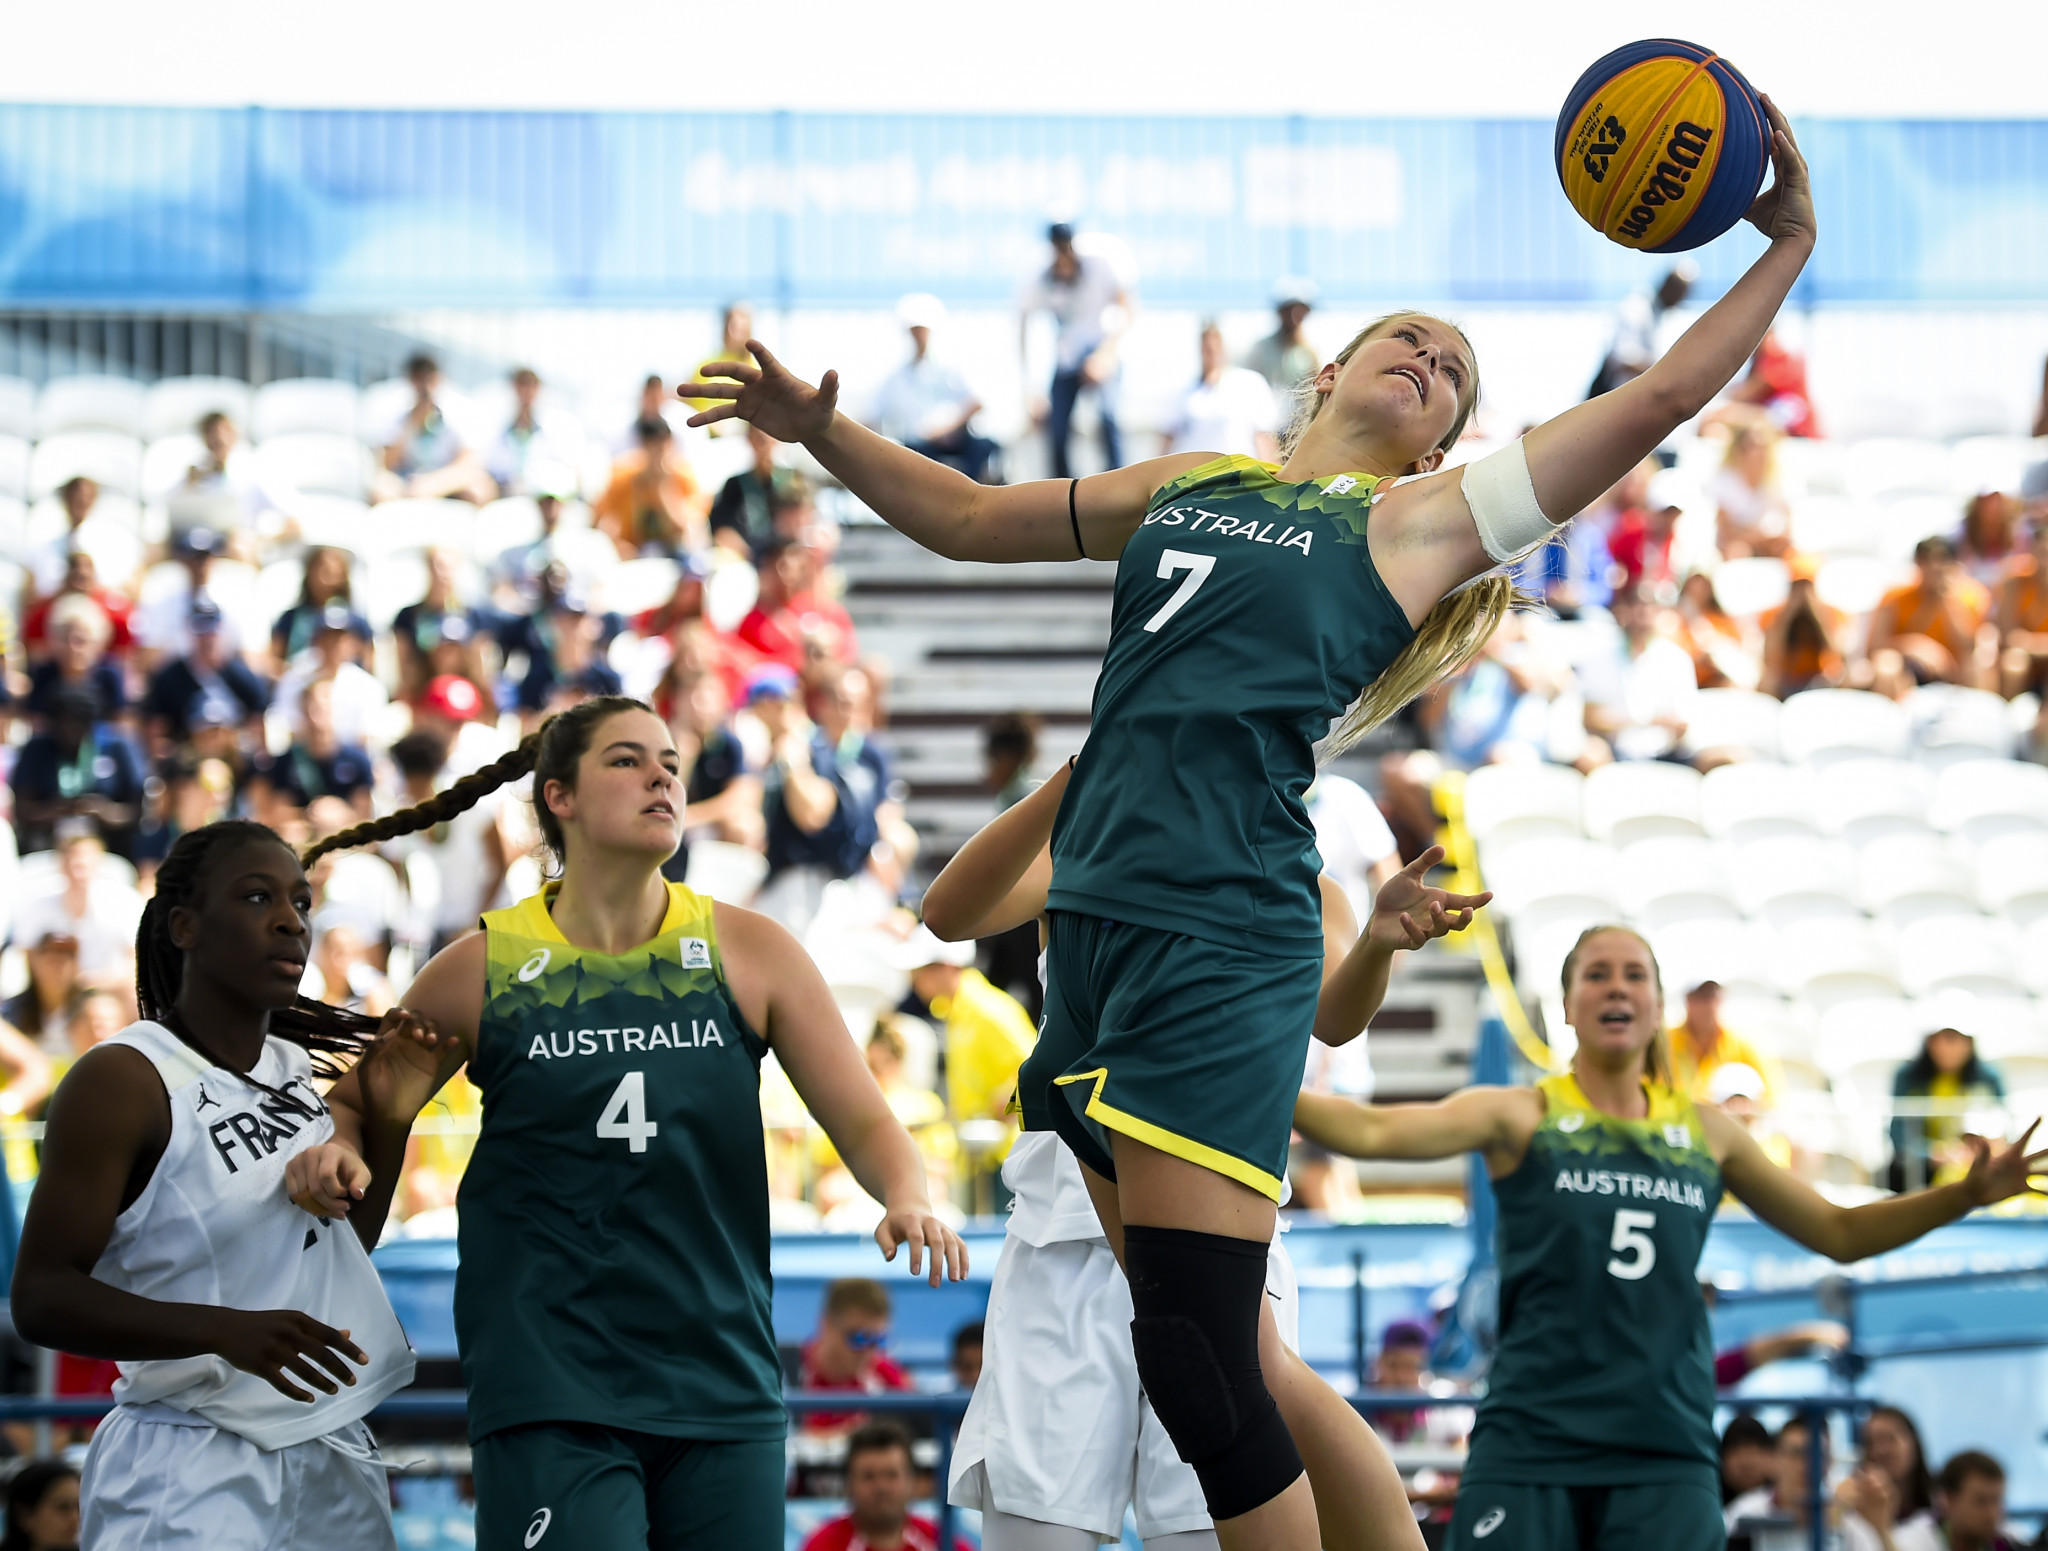 3x3 basketball featured at last year's Youth Olympic Games in Buenos Aires 2018 ©Getty Images